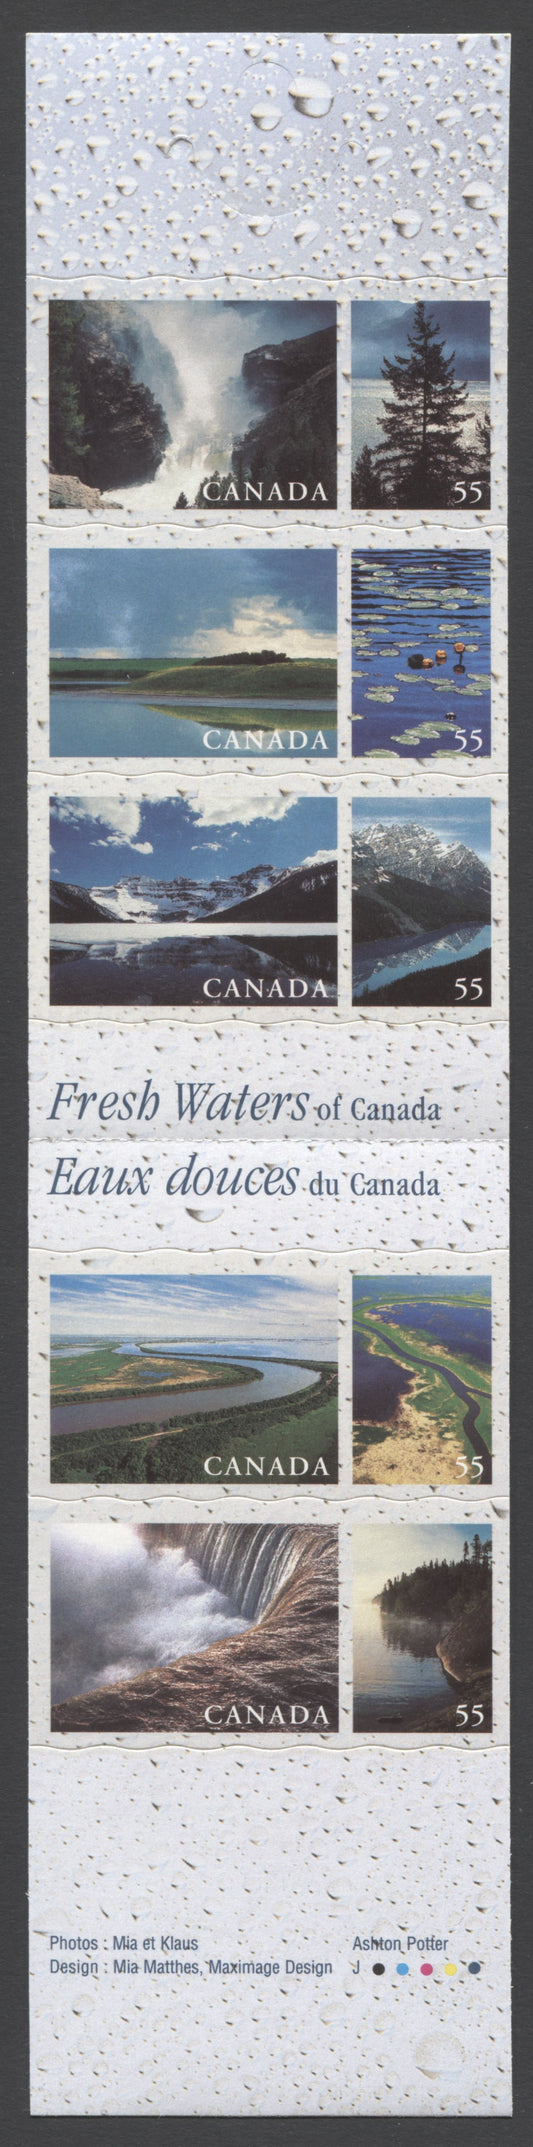 Canada #BK228a-b 2000 Fresh Waters of Canada Issue, Complete $2.75 Booklet, JAC Paper, Dead Paper, 4 mm GT-4 Tagging